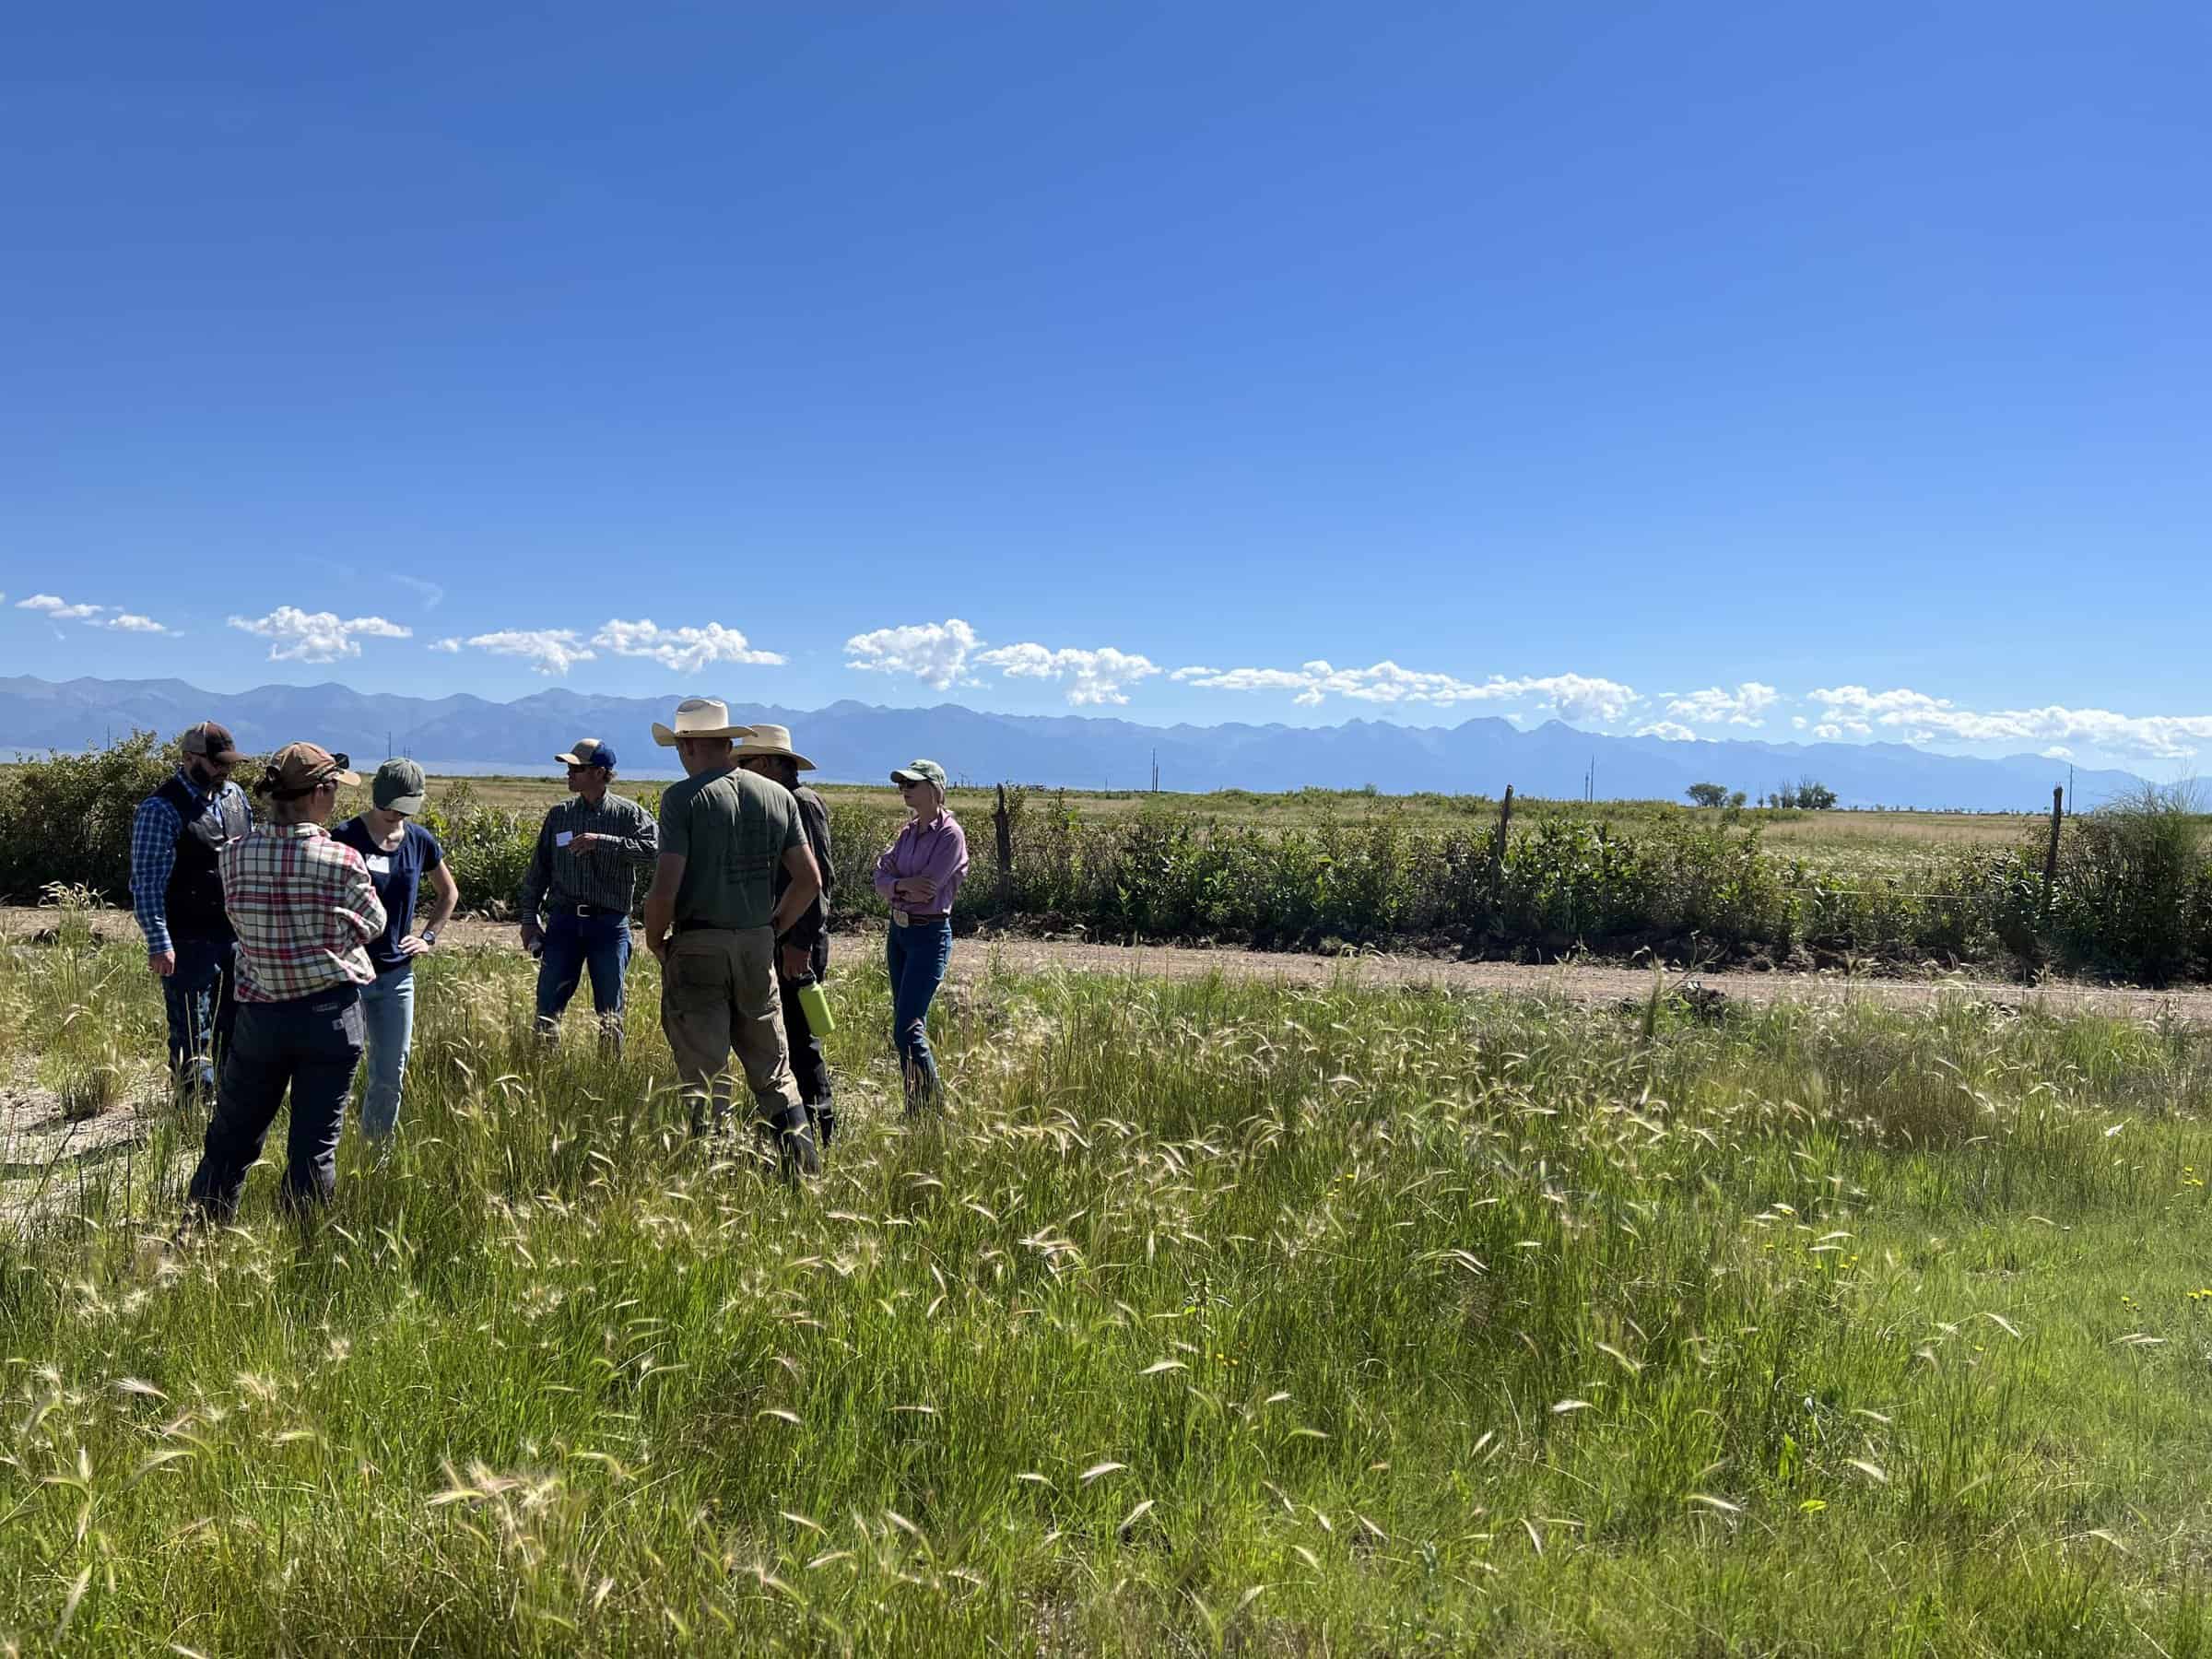 People stand in a knee high grassy field on a blue sunny day near Saguache, Colorado.